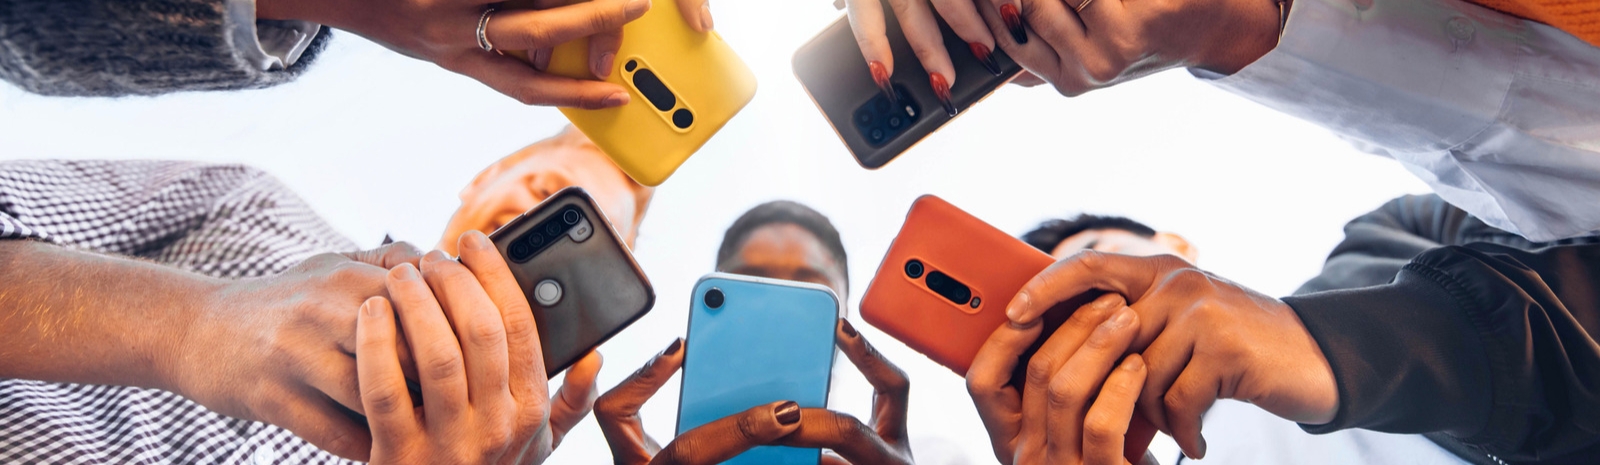 Group of people taking photo with cell phones